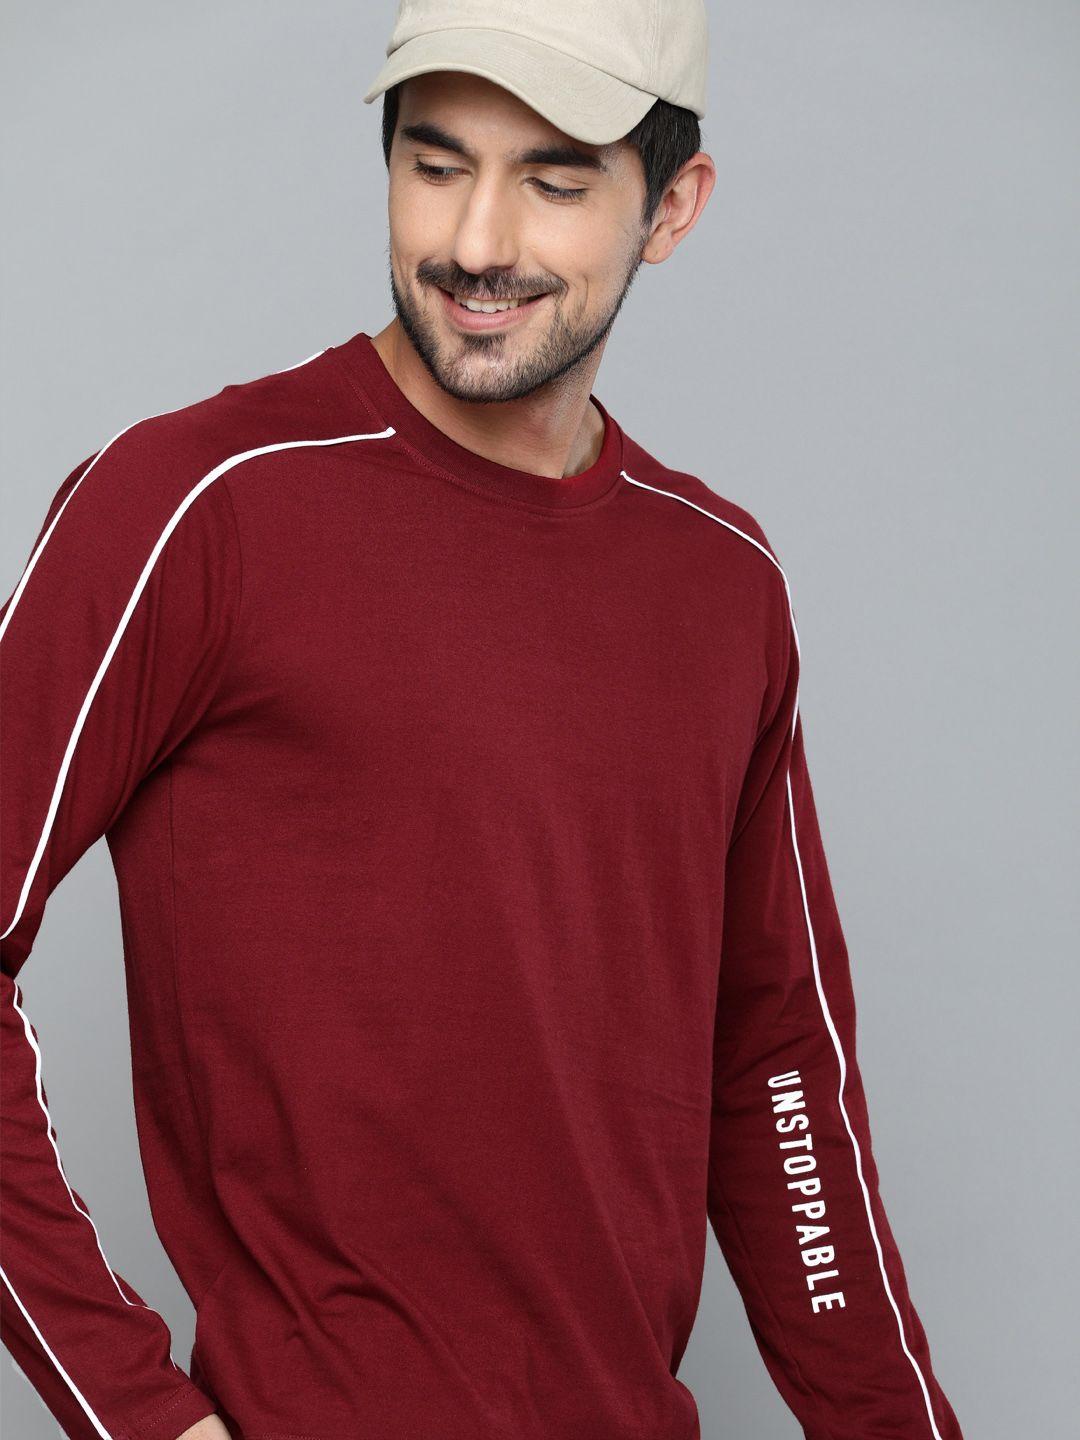 here&now men maroon printed round neck t-shirt